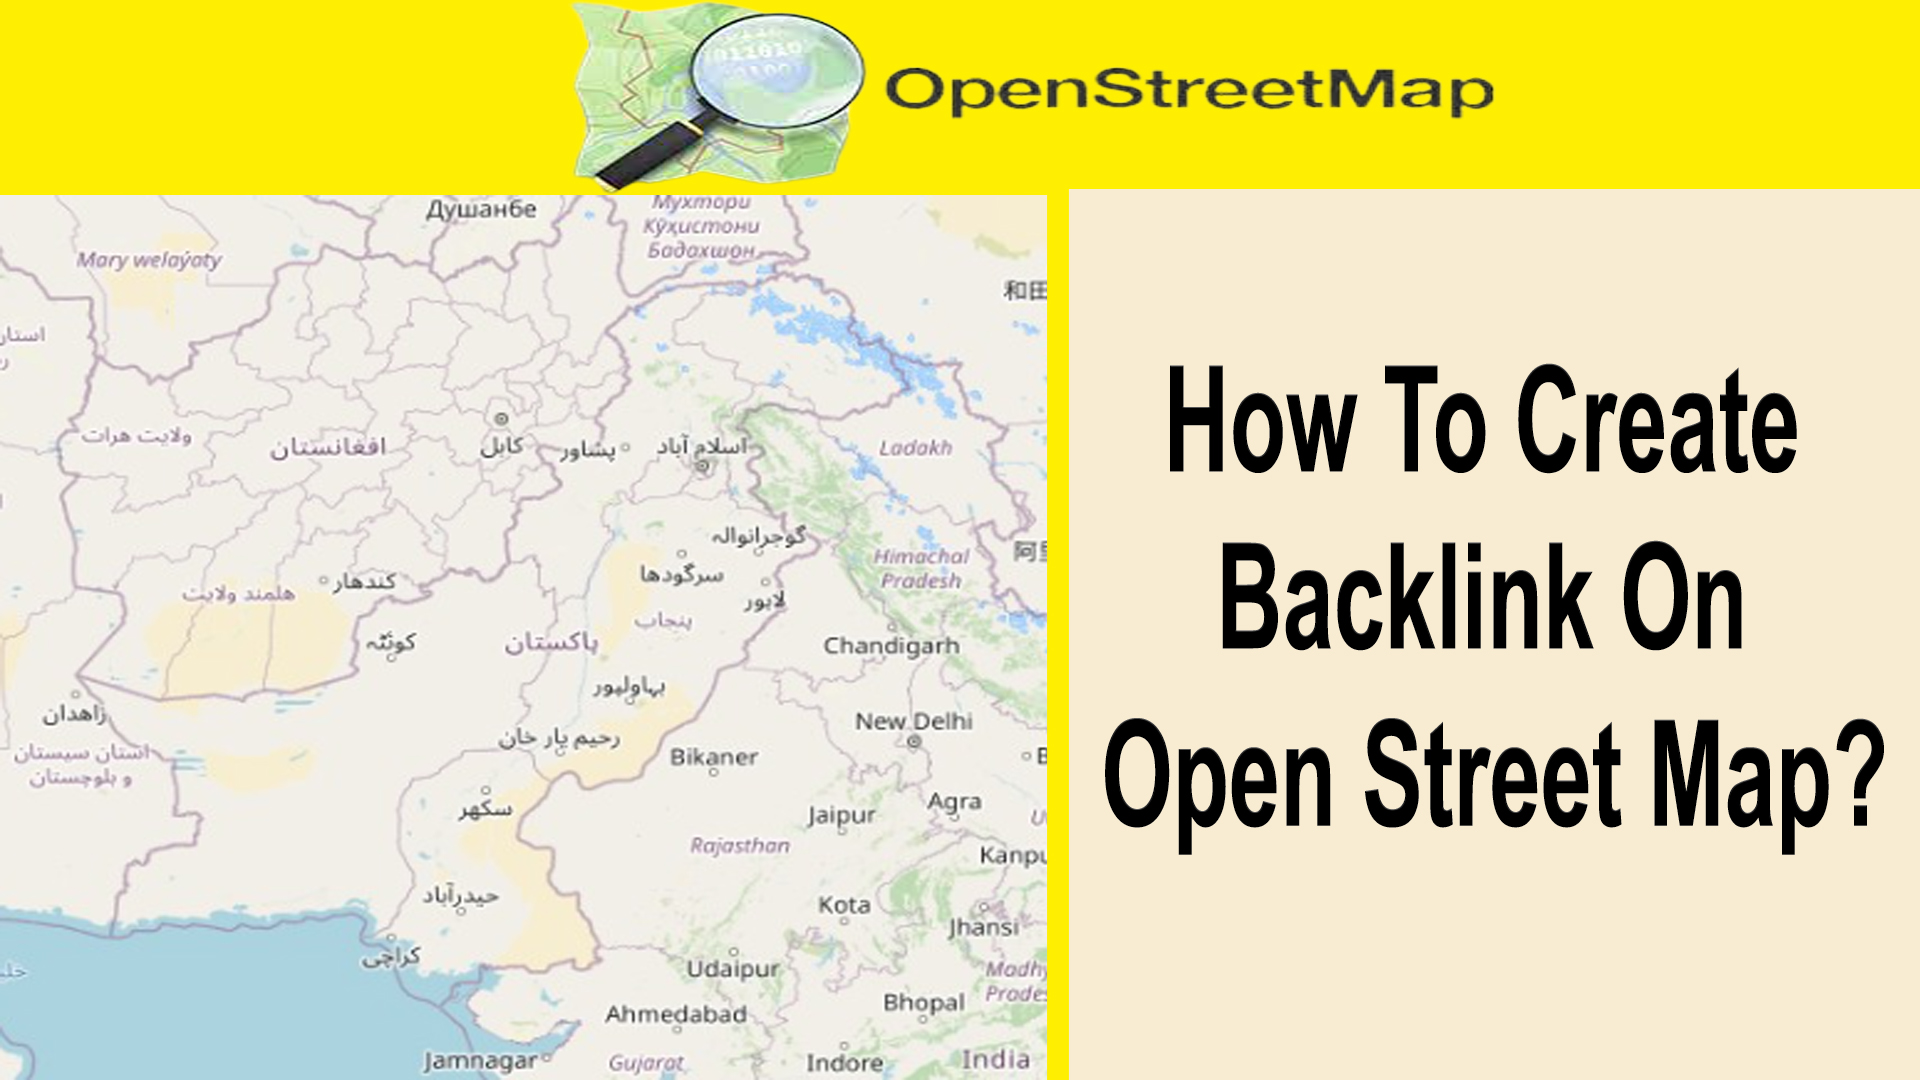 How To Create Backlink On Open Street Map